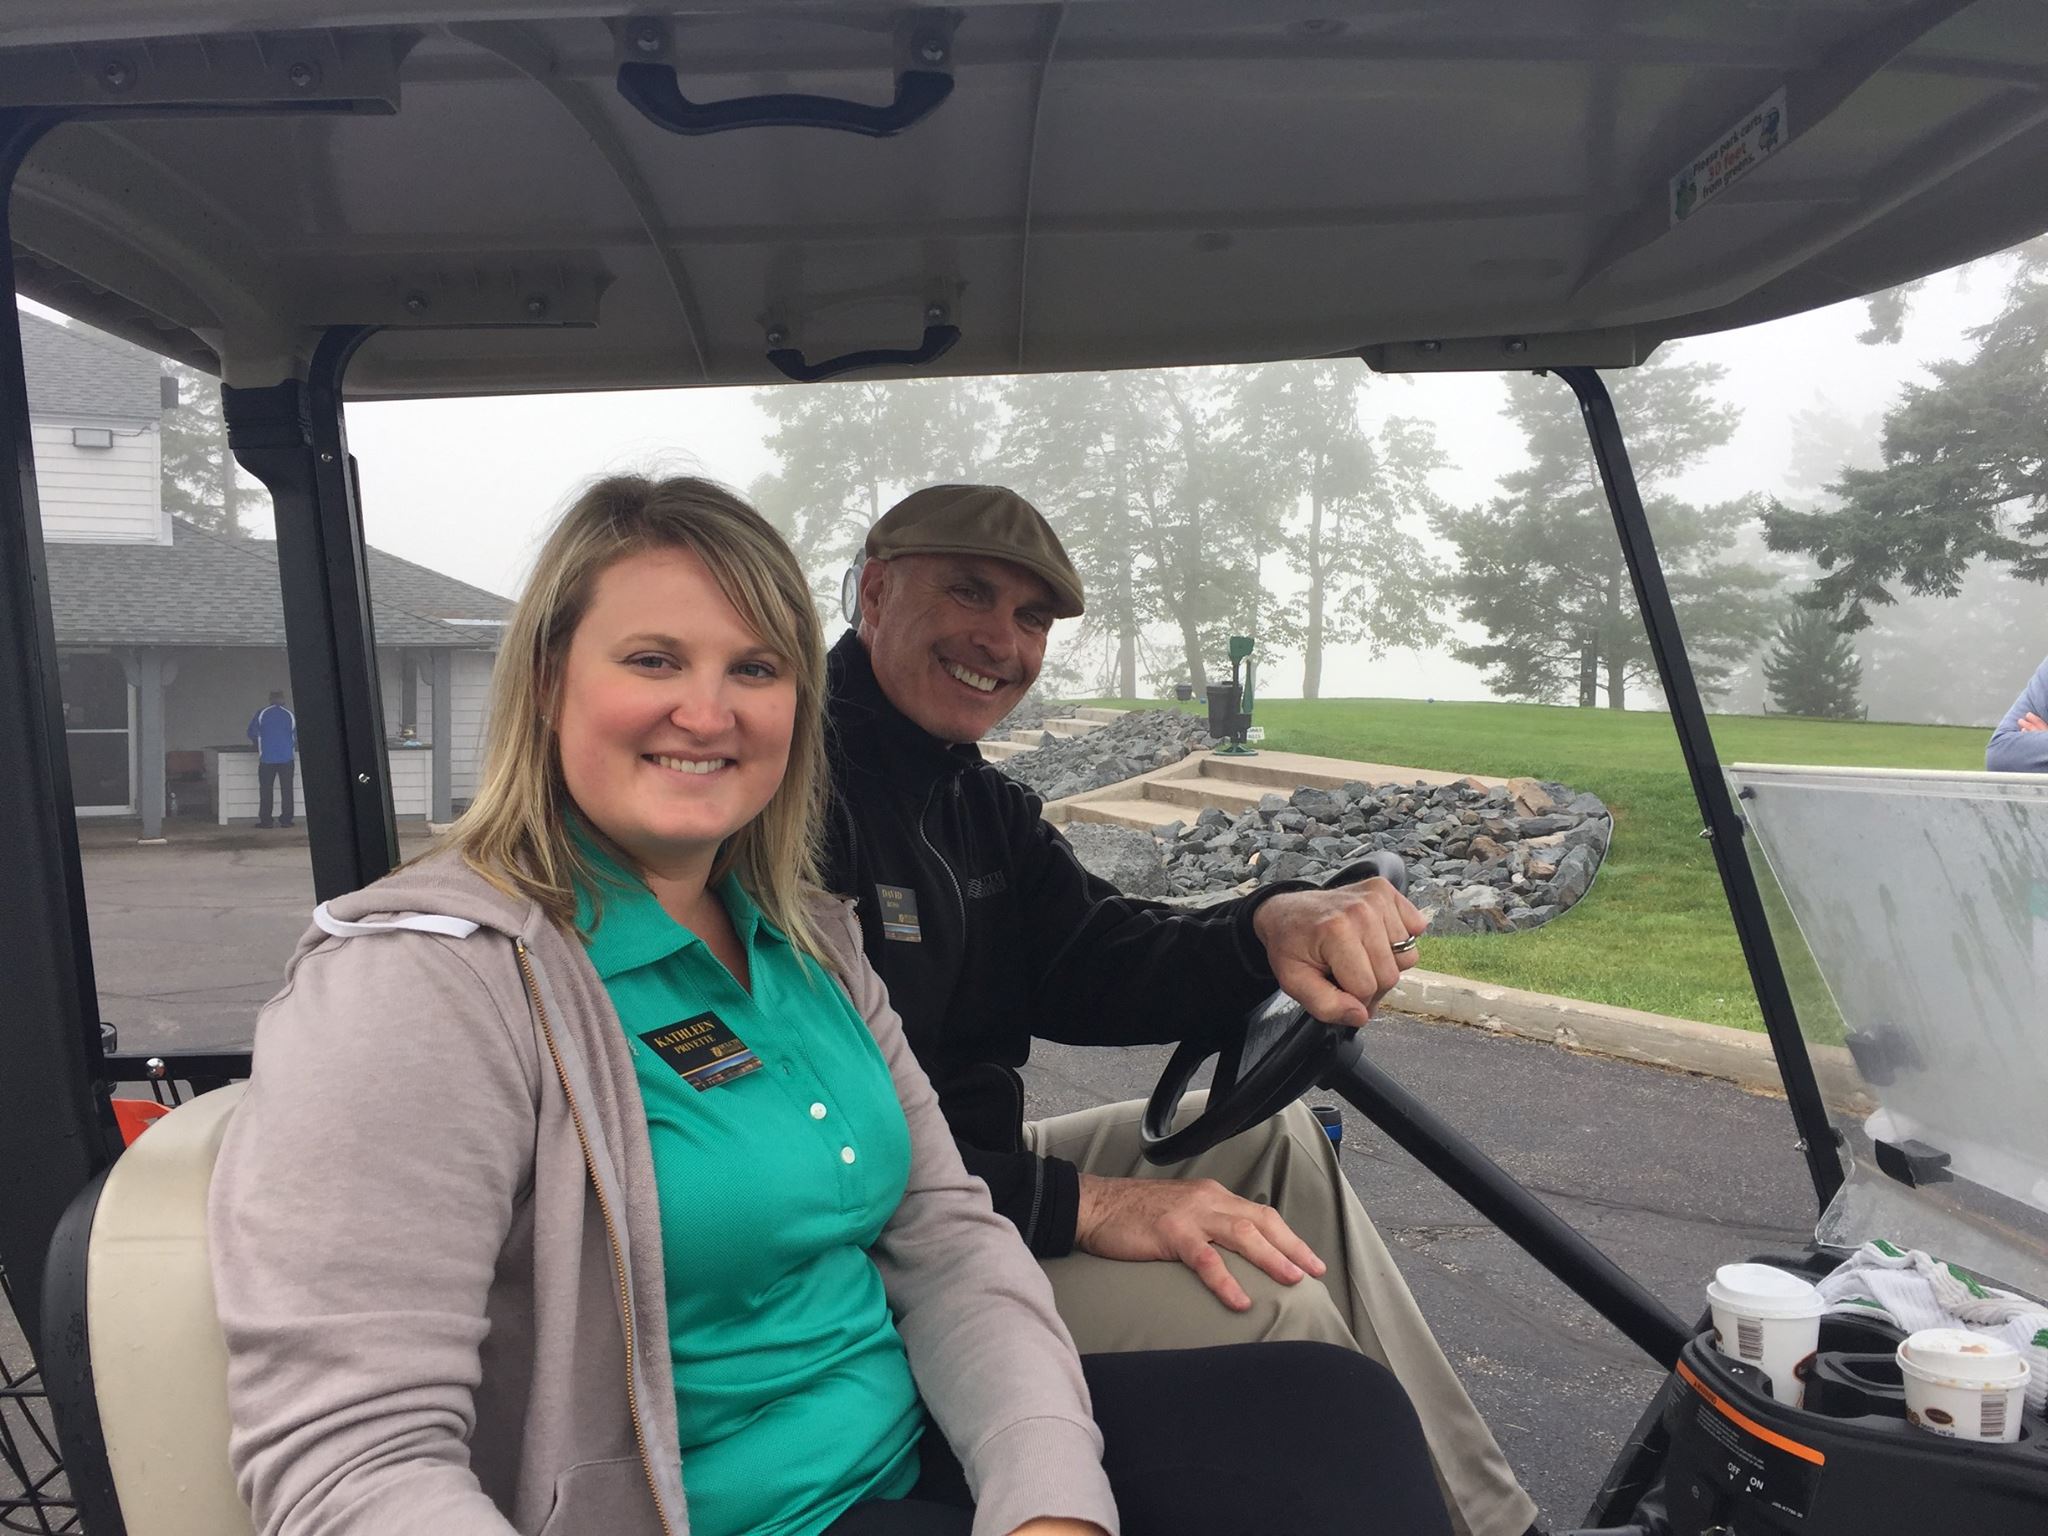 Smiling man and woman on golf cart